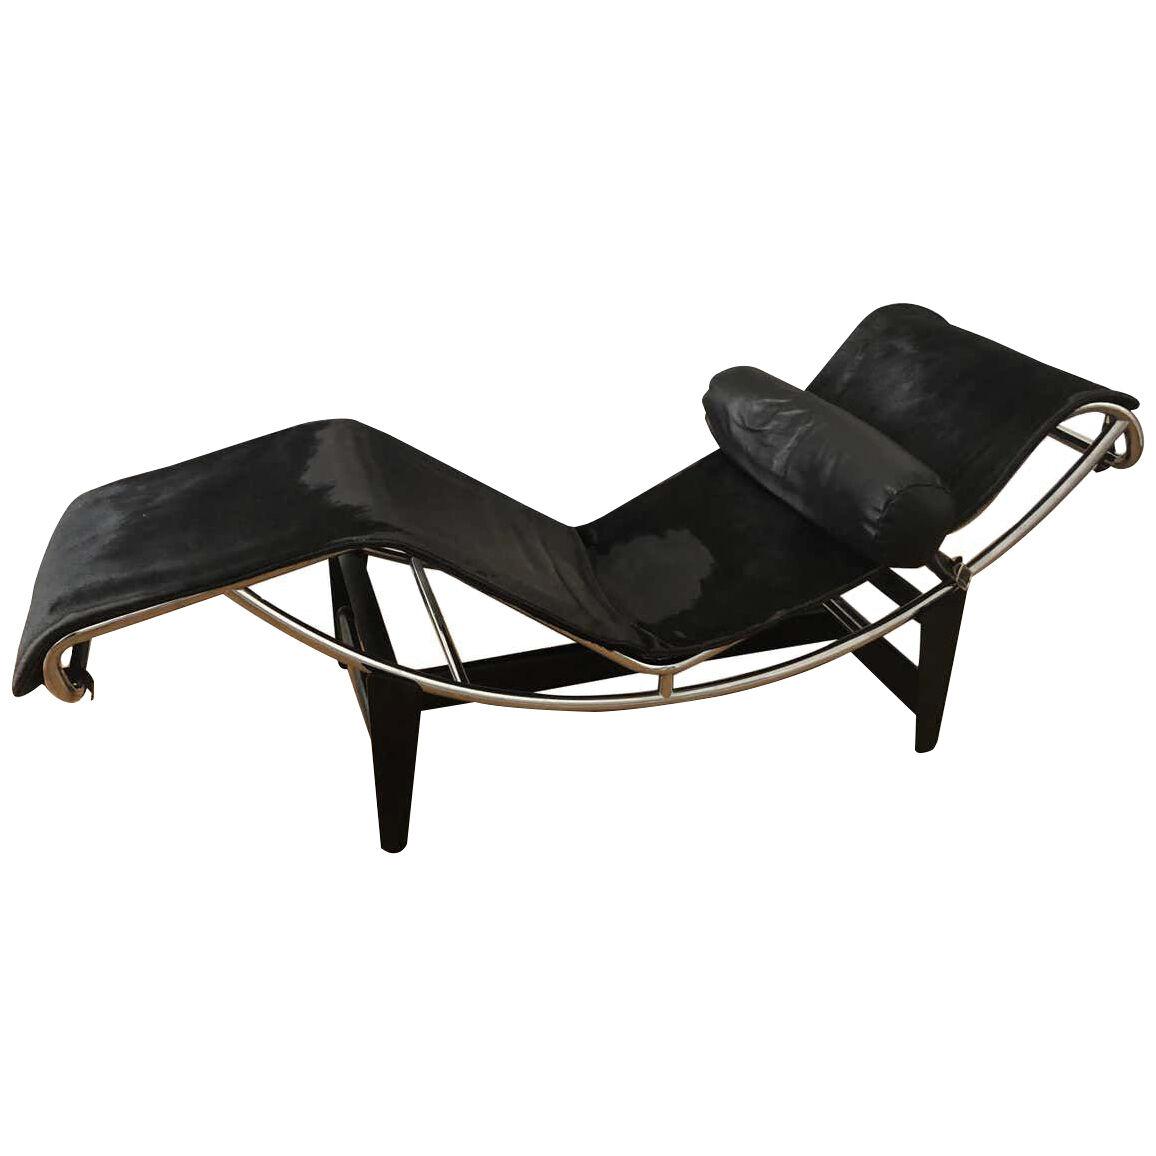 Rare Early Le Corbusier LC4 Chaise Lounge Cassina Signed Nr. 737, 1960s